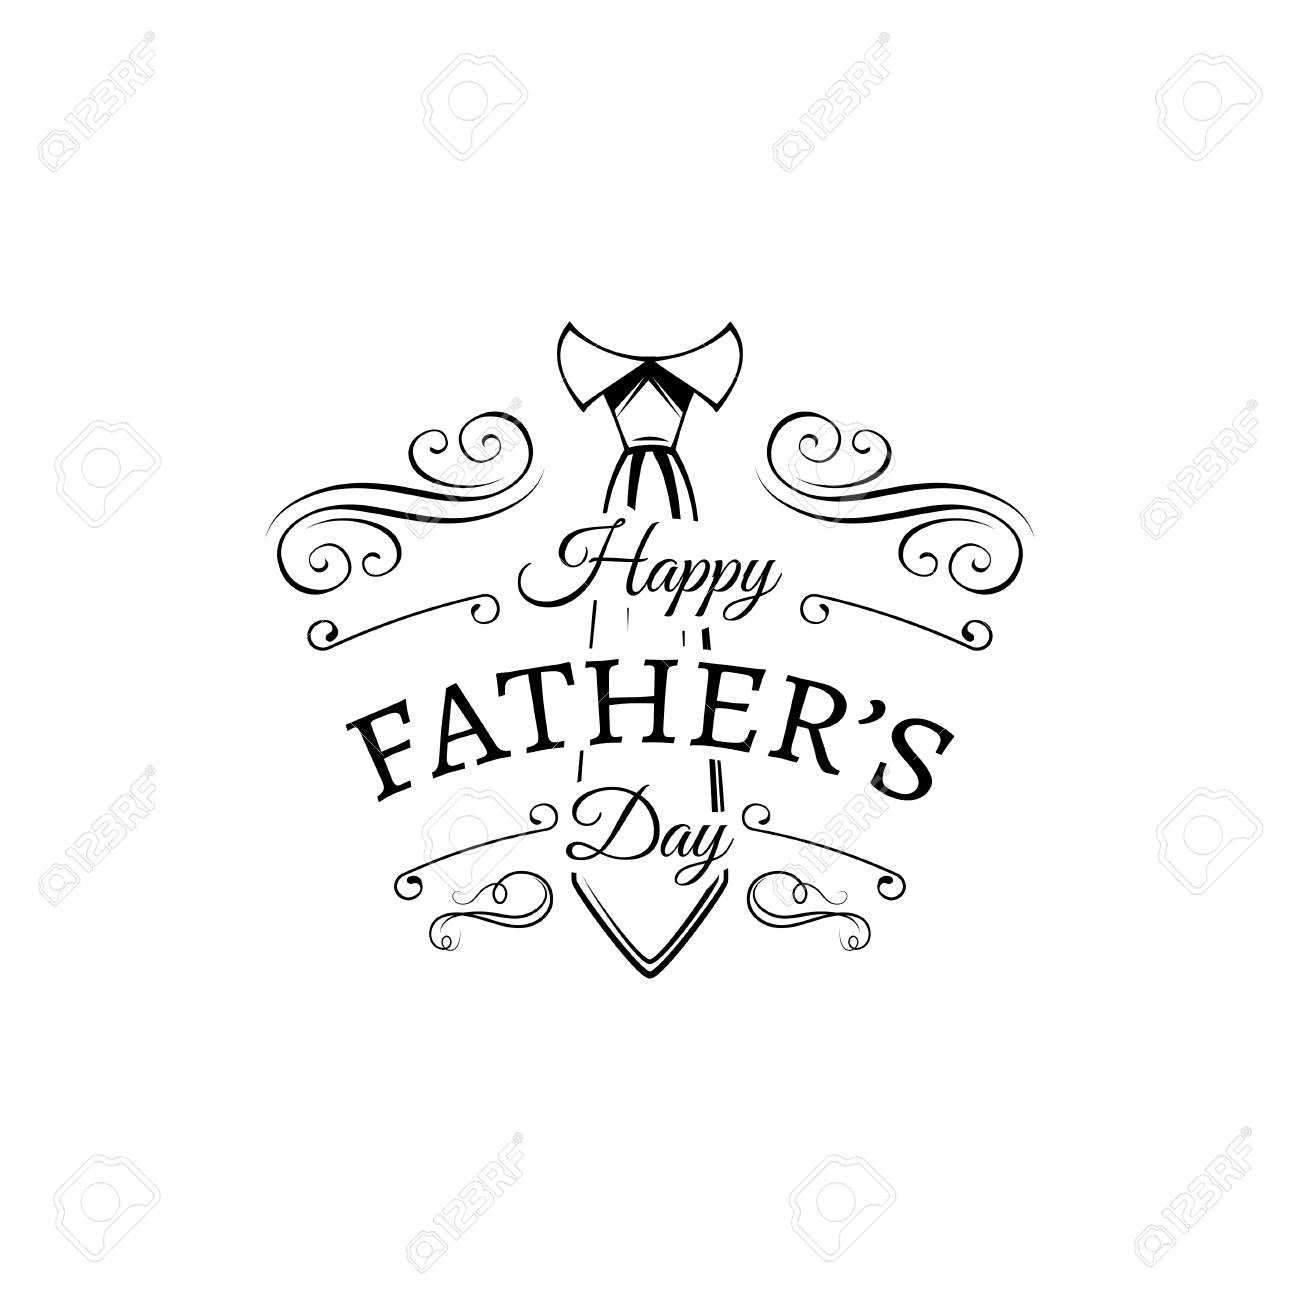 Happy Fathers Day Card Design With Necktie Vector Illustration Intended For Fathers Day Card Template